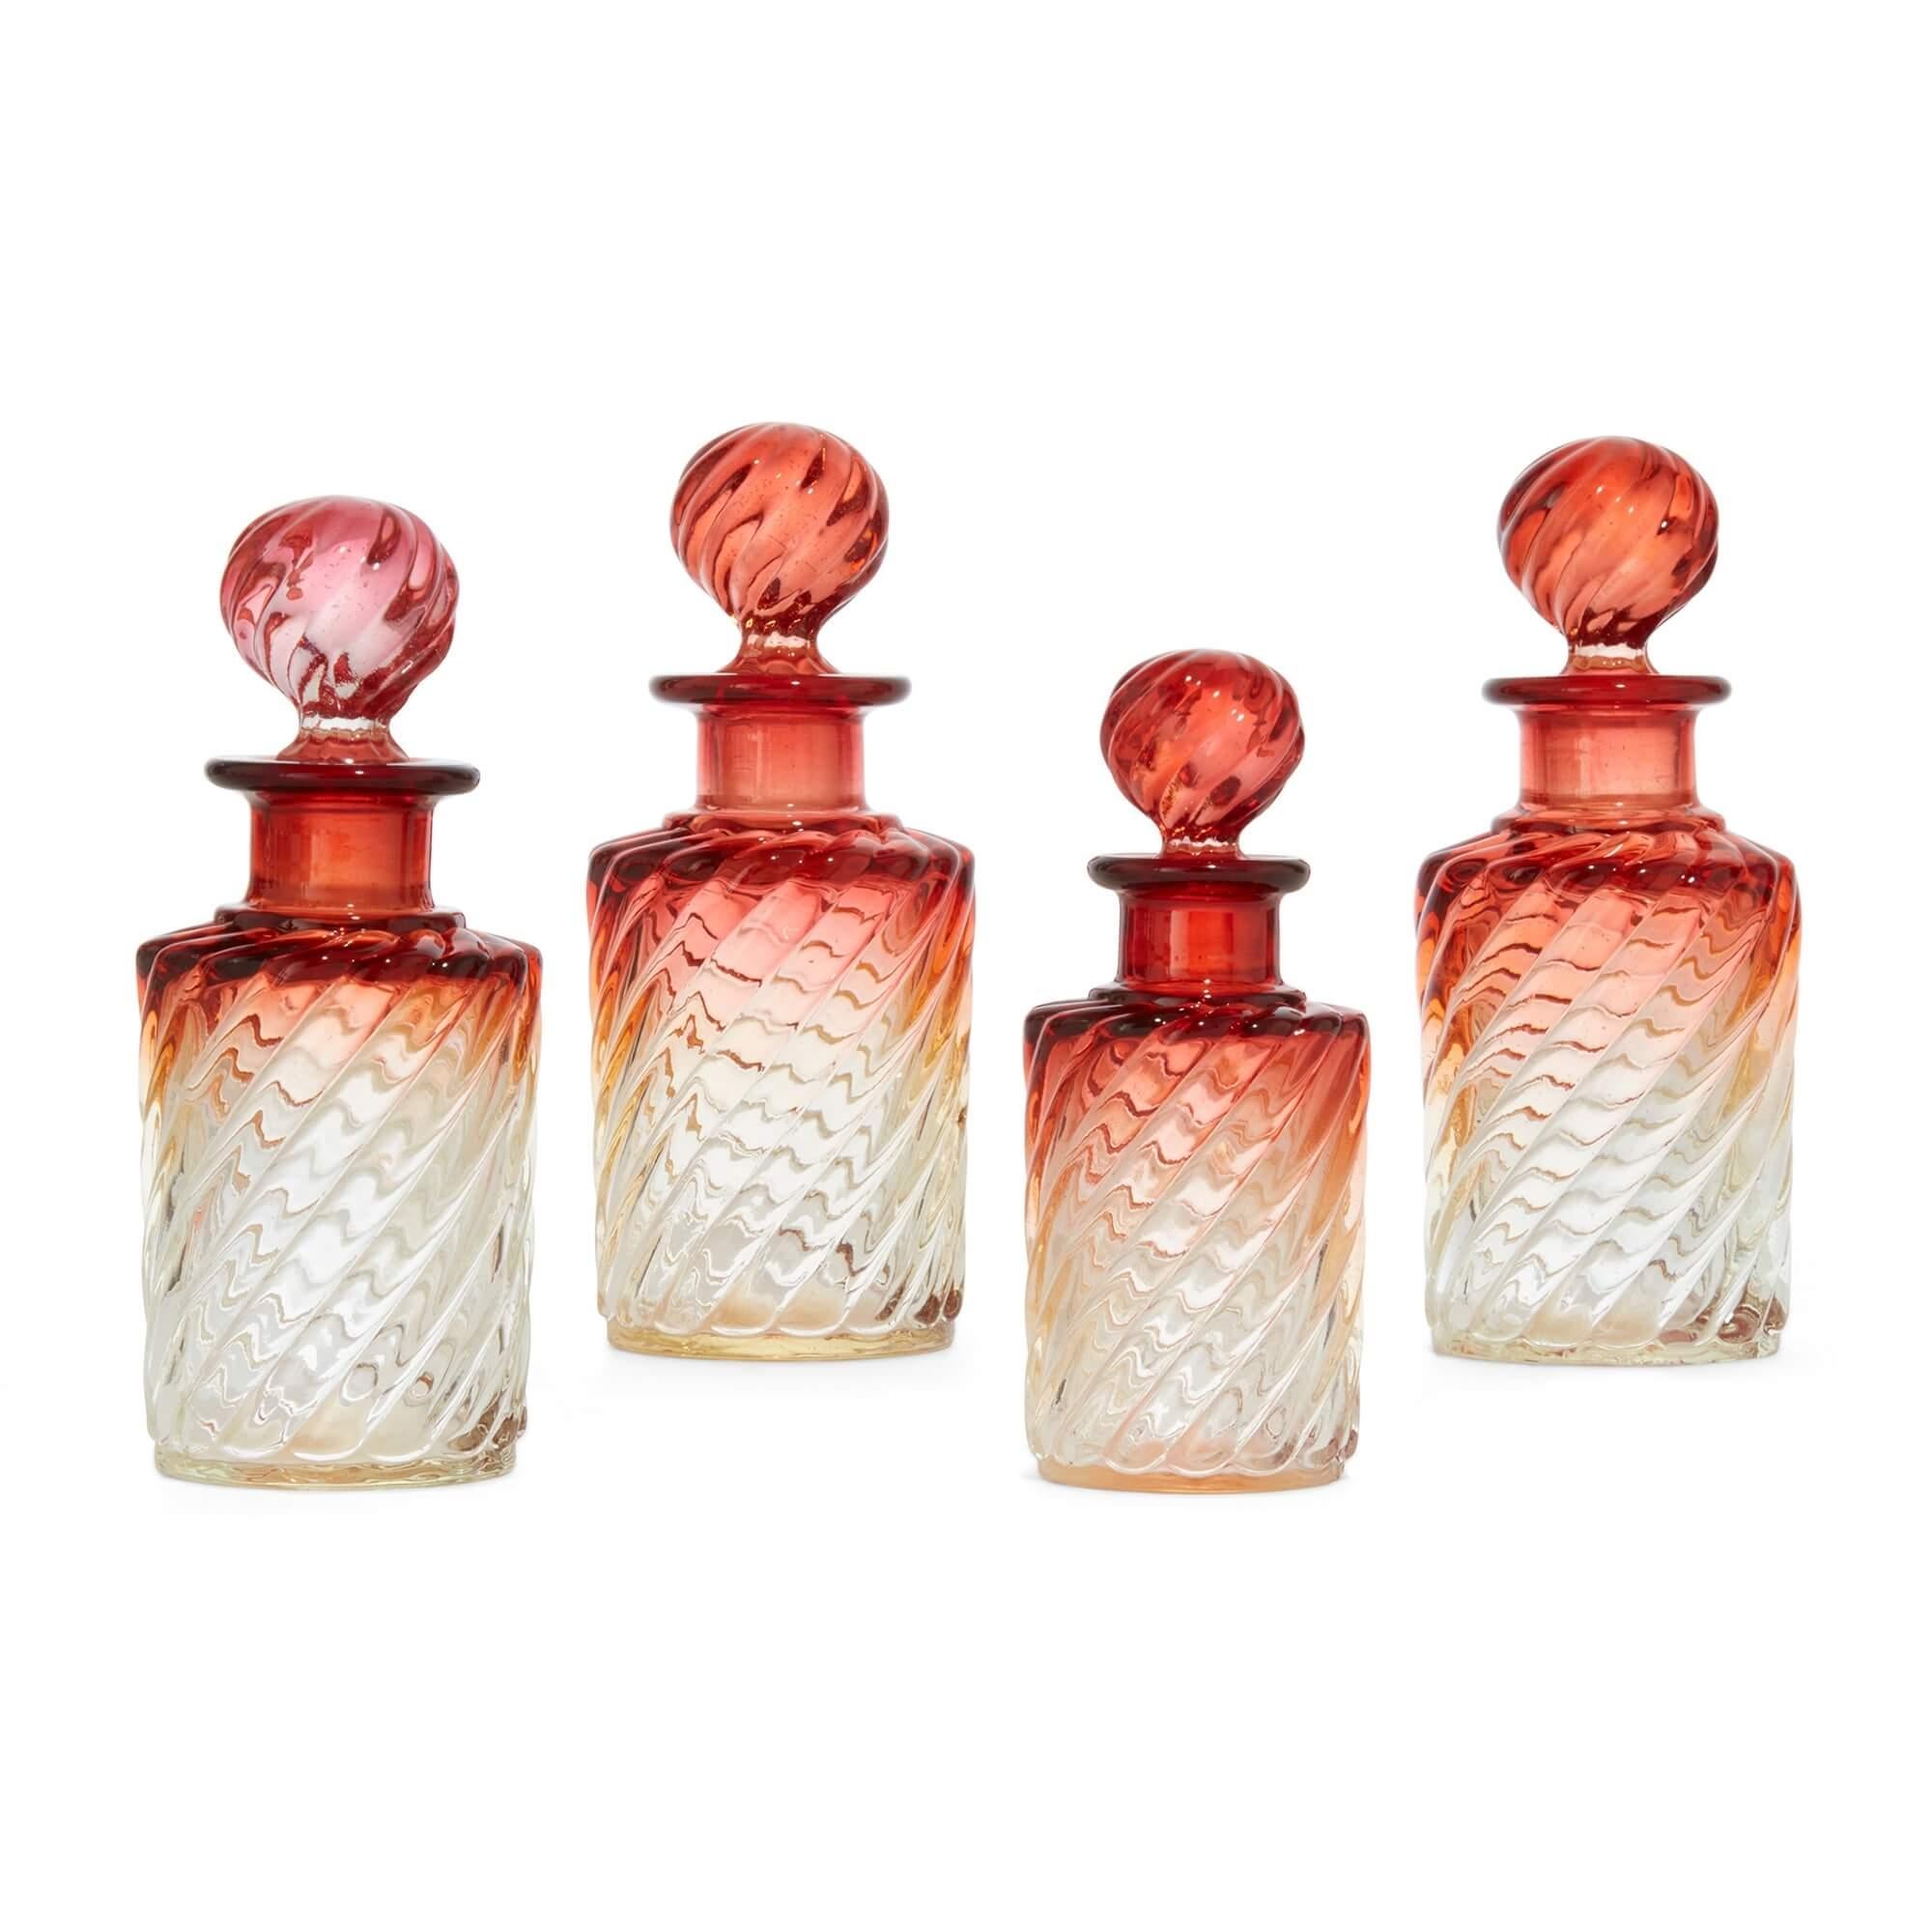 Baccarat crystal glass collection of bottles and trays 
French, 20th Century 
Largest: Height 4cm, width 24.5cm, depth 9cm 
Smallest: Height 12.5cm, width 4.5cm, depth 4.5cm

This elegant collection of amberina crystal glass bottles and trays was